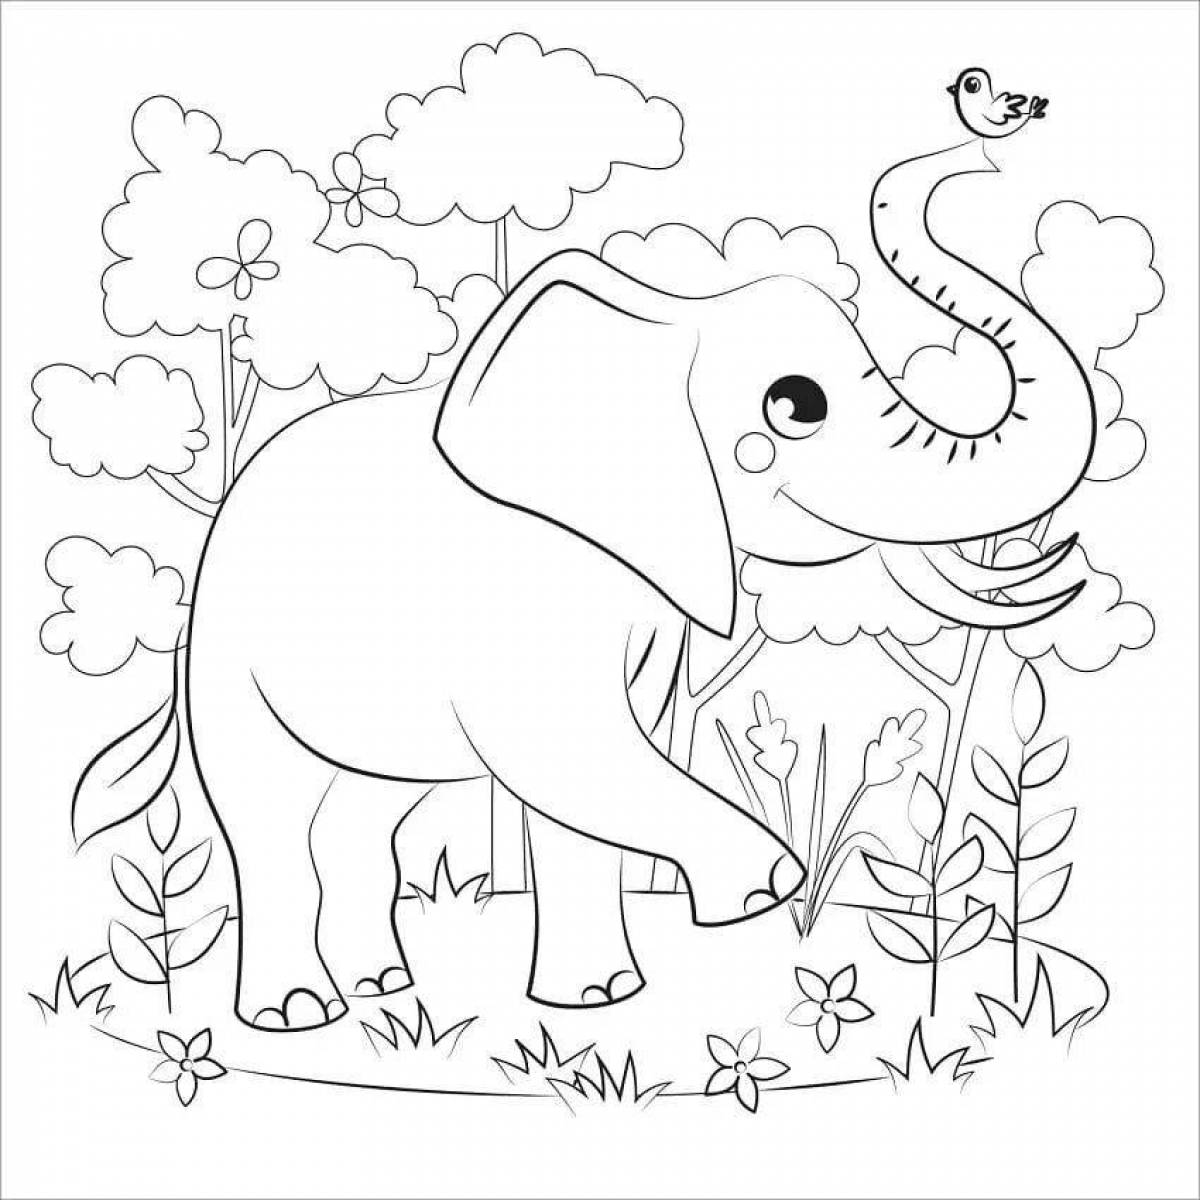 Charming elephant and girl coloring book